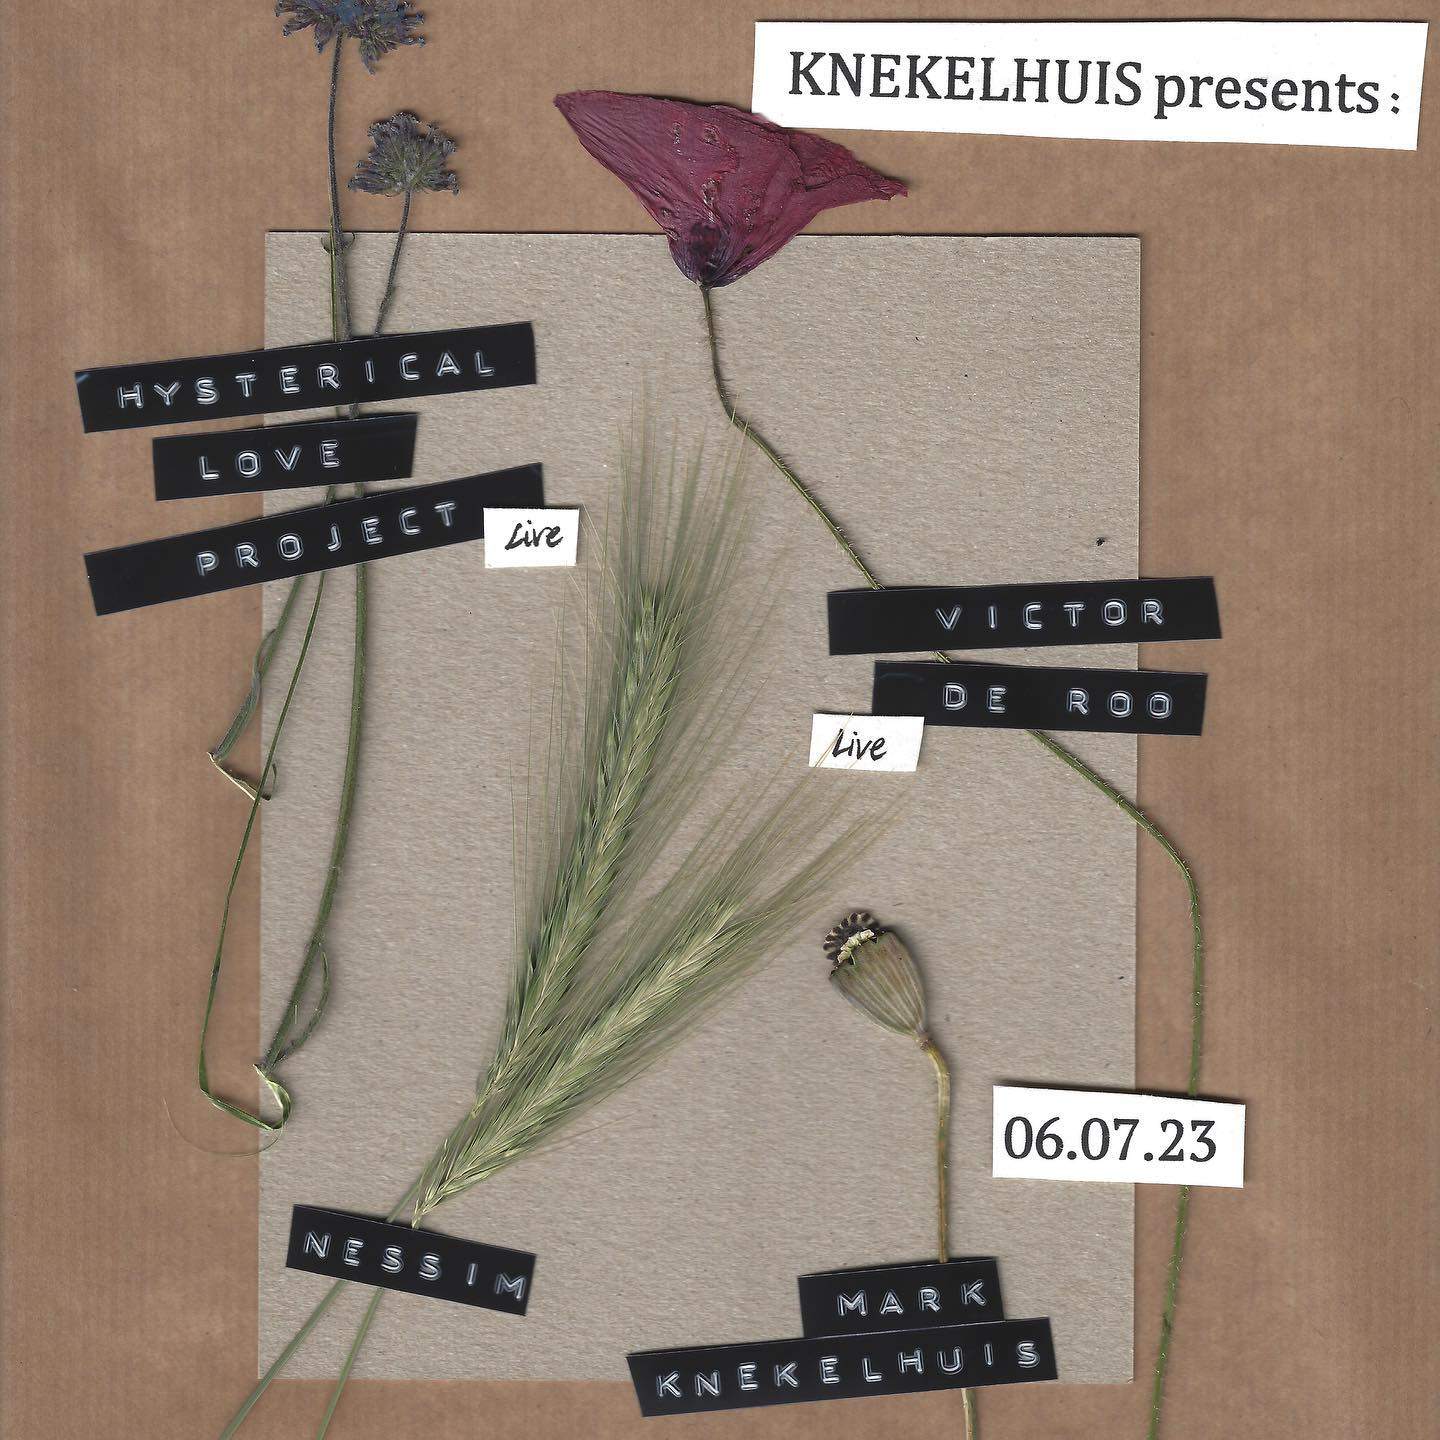 Knekelhuis Concerts: Hysterical Love Project (live), Victor De Roo (live), Nessim - Página frontal